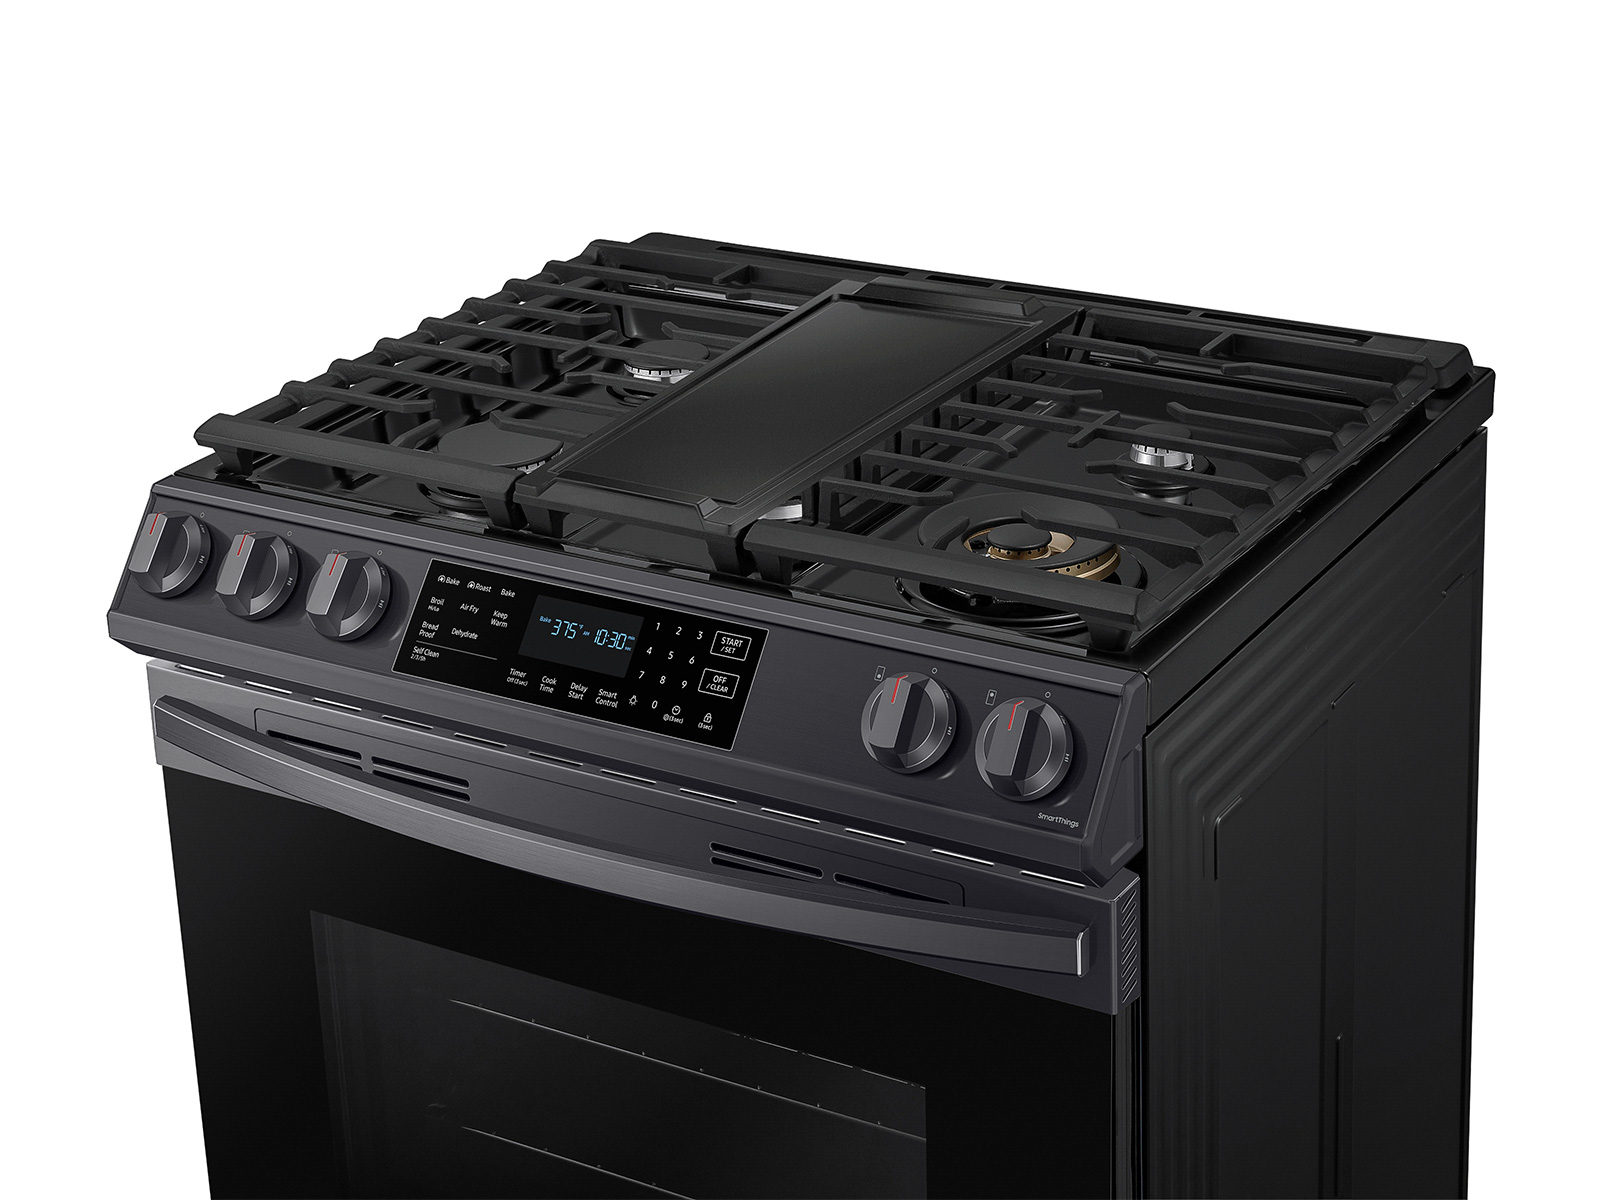 Buy Samsung 6.0 cu. ft. Gas Range with Air Fry - NX60T8511SG